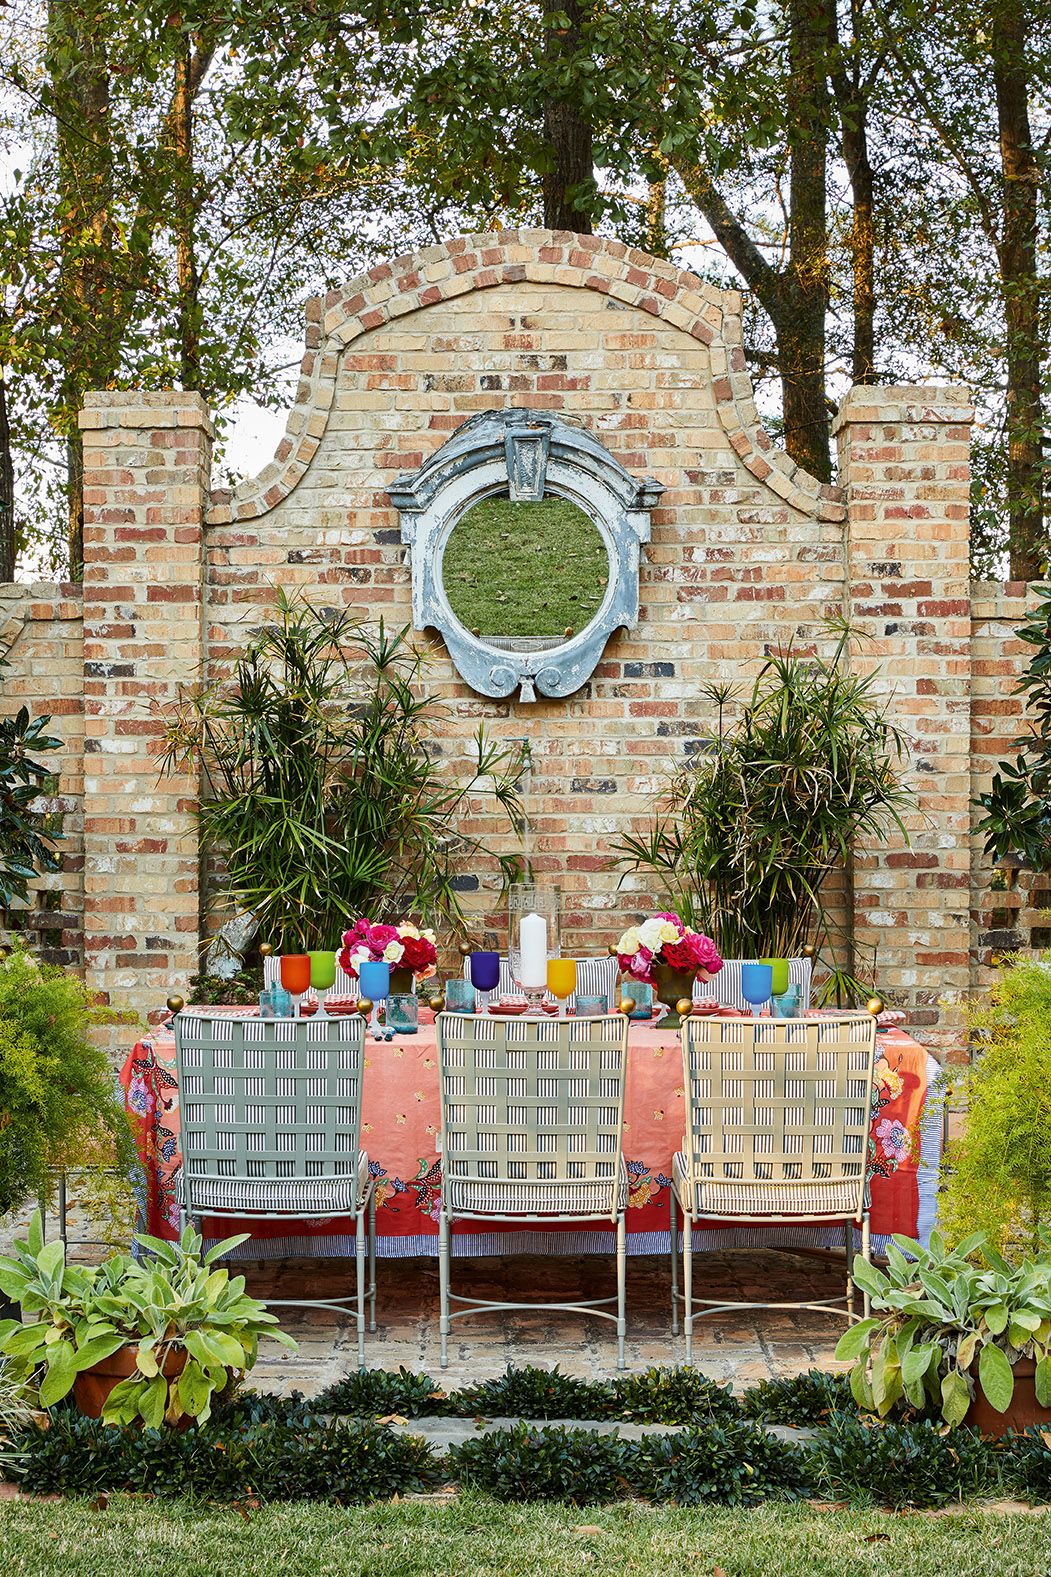 Celebrating Home : A Time for Every Season - coffee table book - design book - dining alfresco - outdoor dining